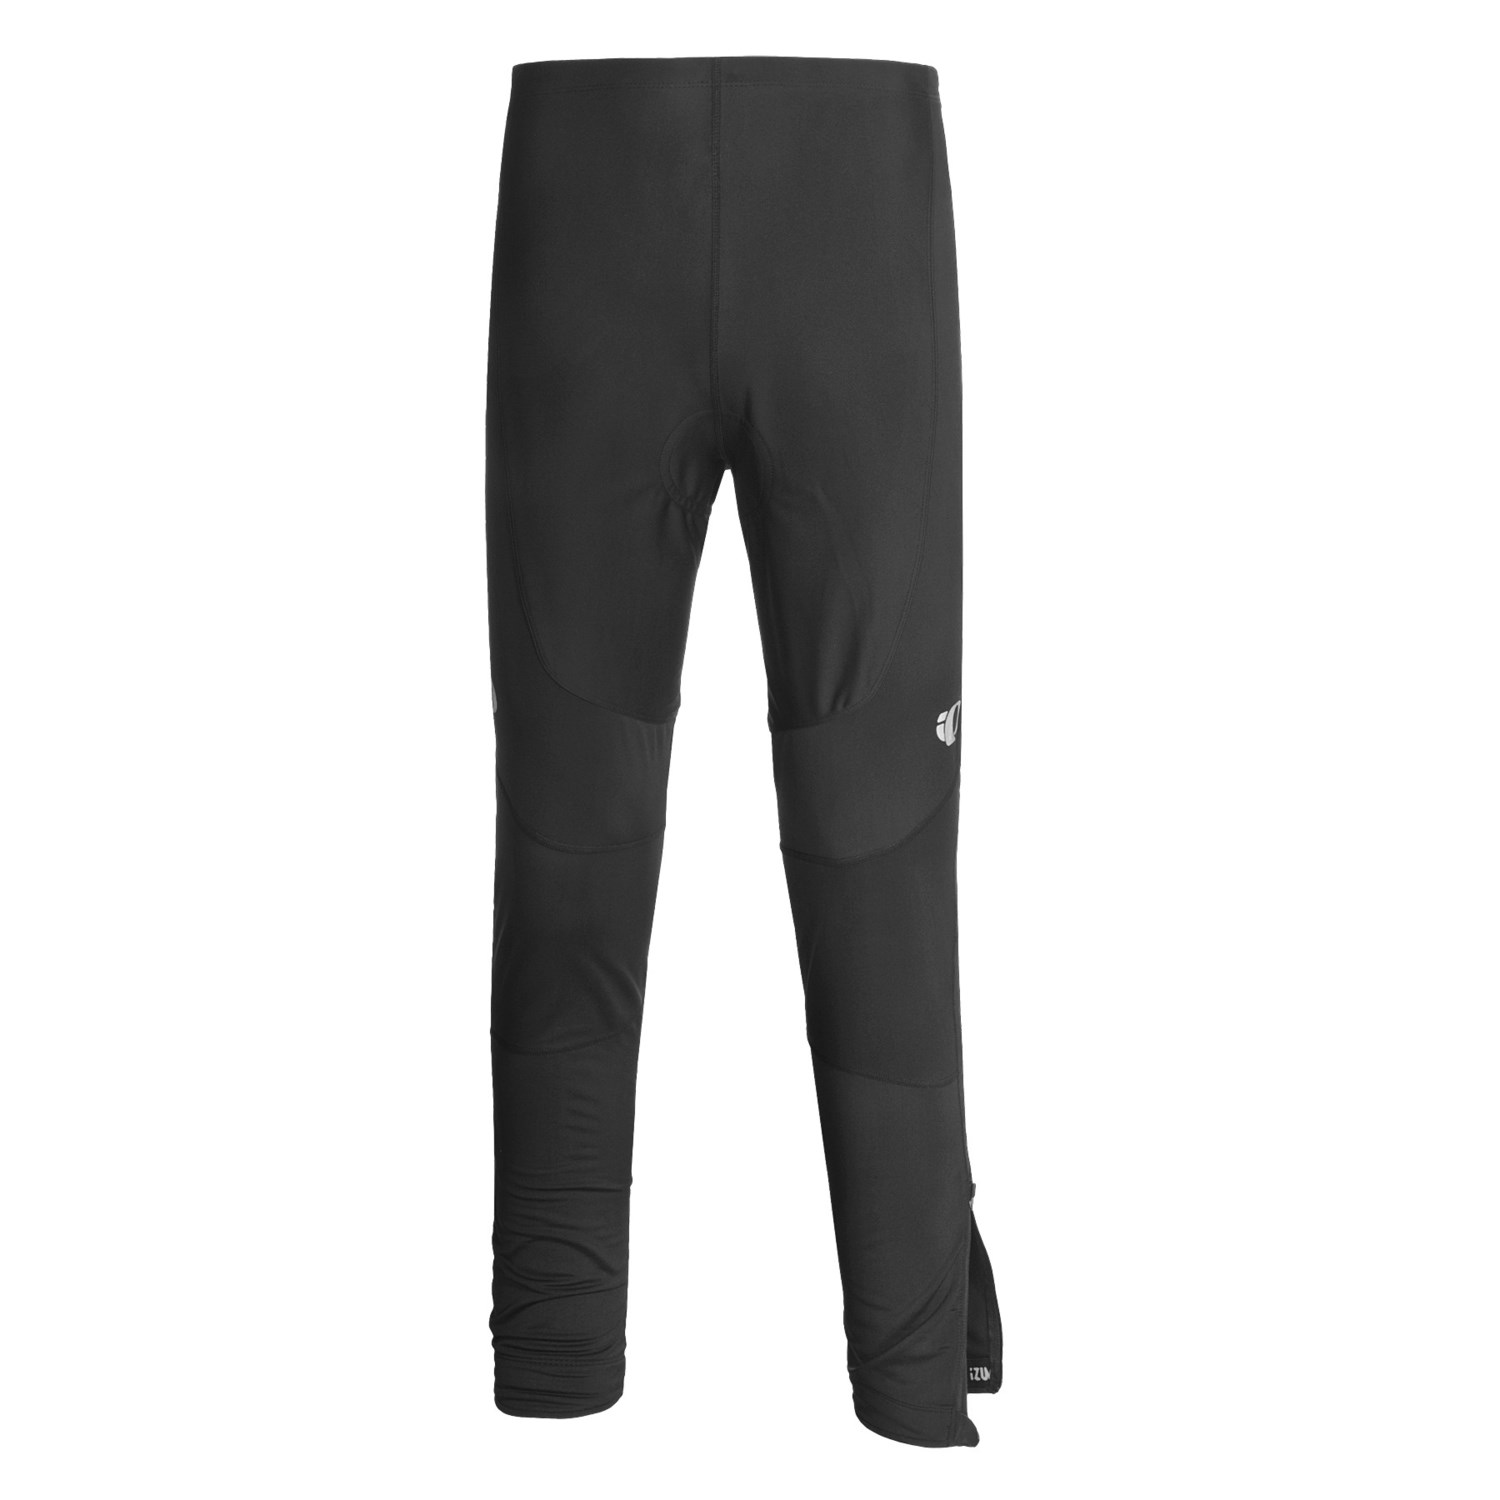 Pearl Izumi Elite Thermal Cycling Tights (For Men) 4212A Save 31